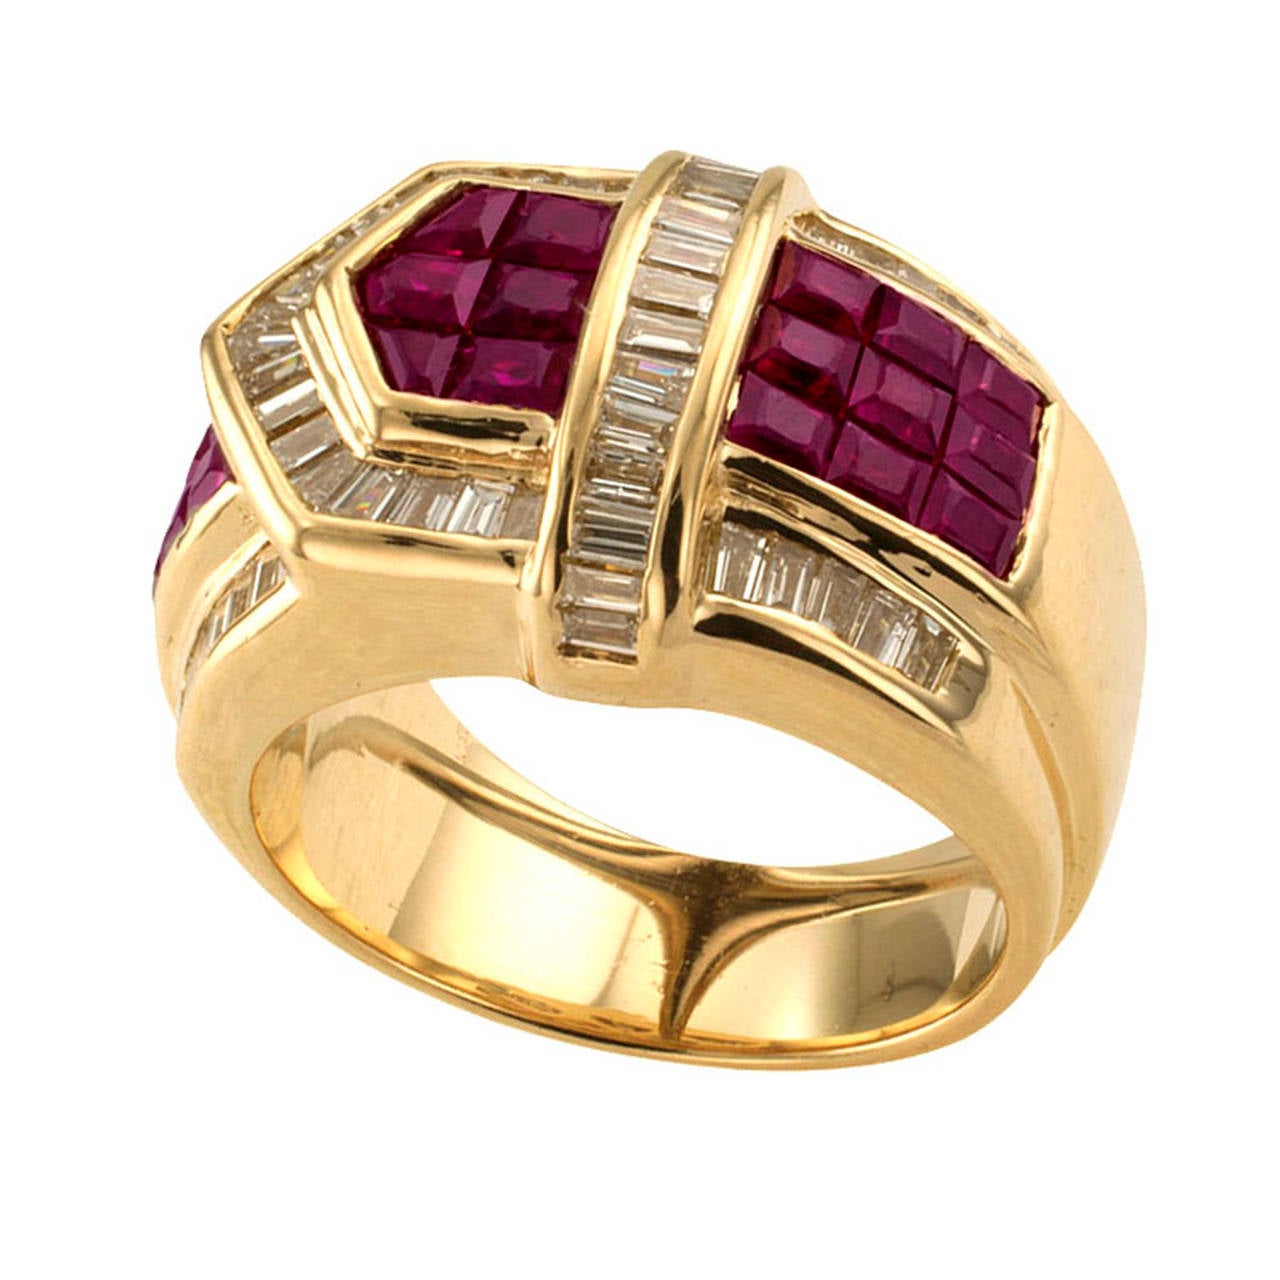 Circa 1980, this ruby and diamond ring designed as buckle and strap, comprising the strap formed by invisibly set rubies weighing approximately 1.50 carats and the buckle of channel-set baguette diamonds totaling approximately 1.75 carats,